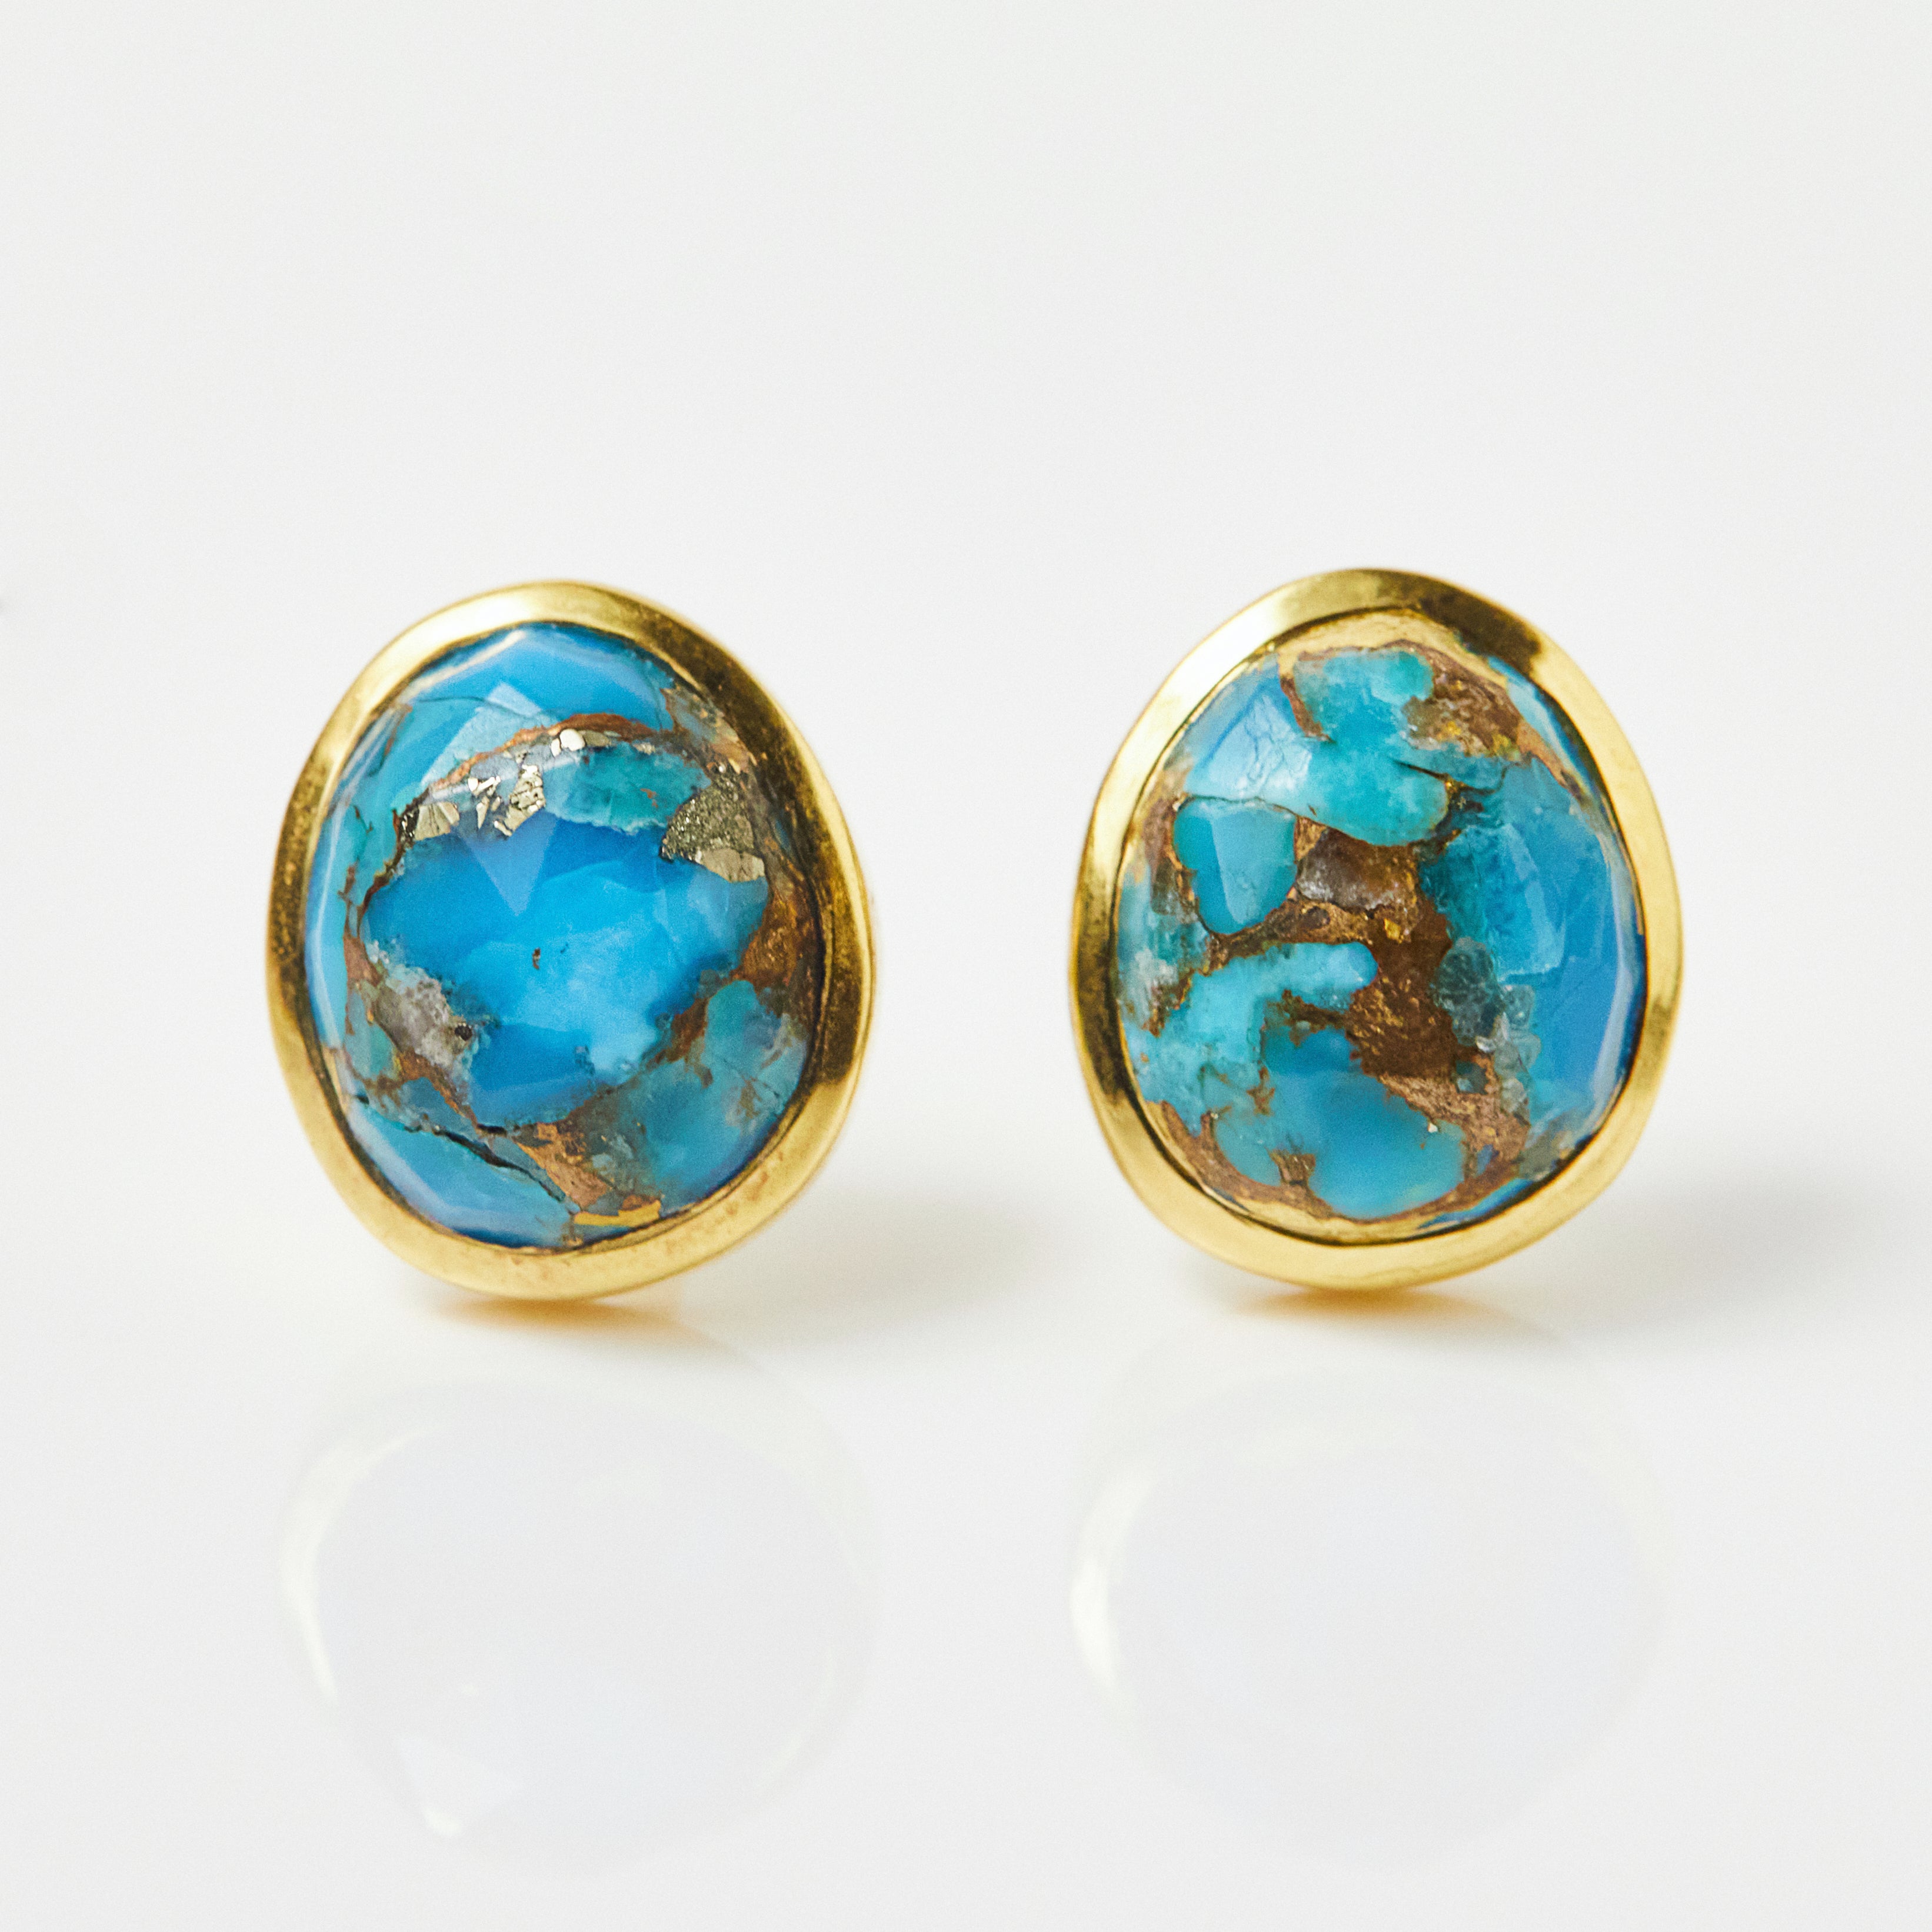 Bougie Cowgirl Turquoise Stud Earrings – The Crooked Cactus Boutique